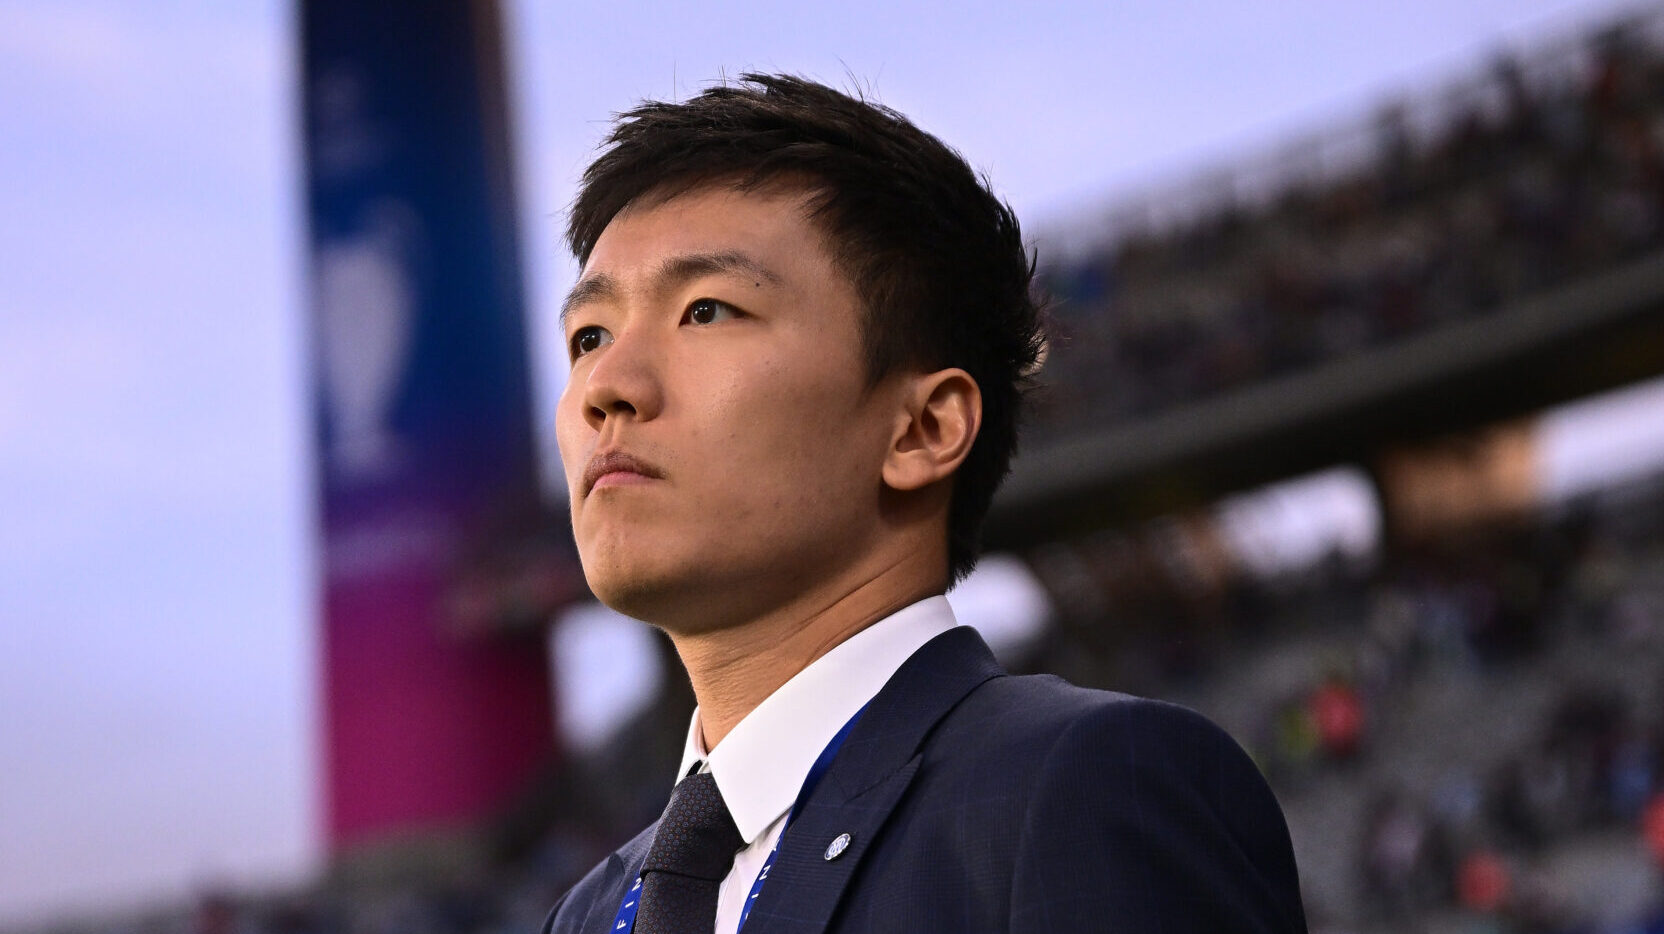 Inter owner Steven Zhang made his first public remarks in months at the Formula One Grand Prix in China over the weekend, corroborating the recent news.